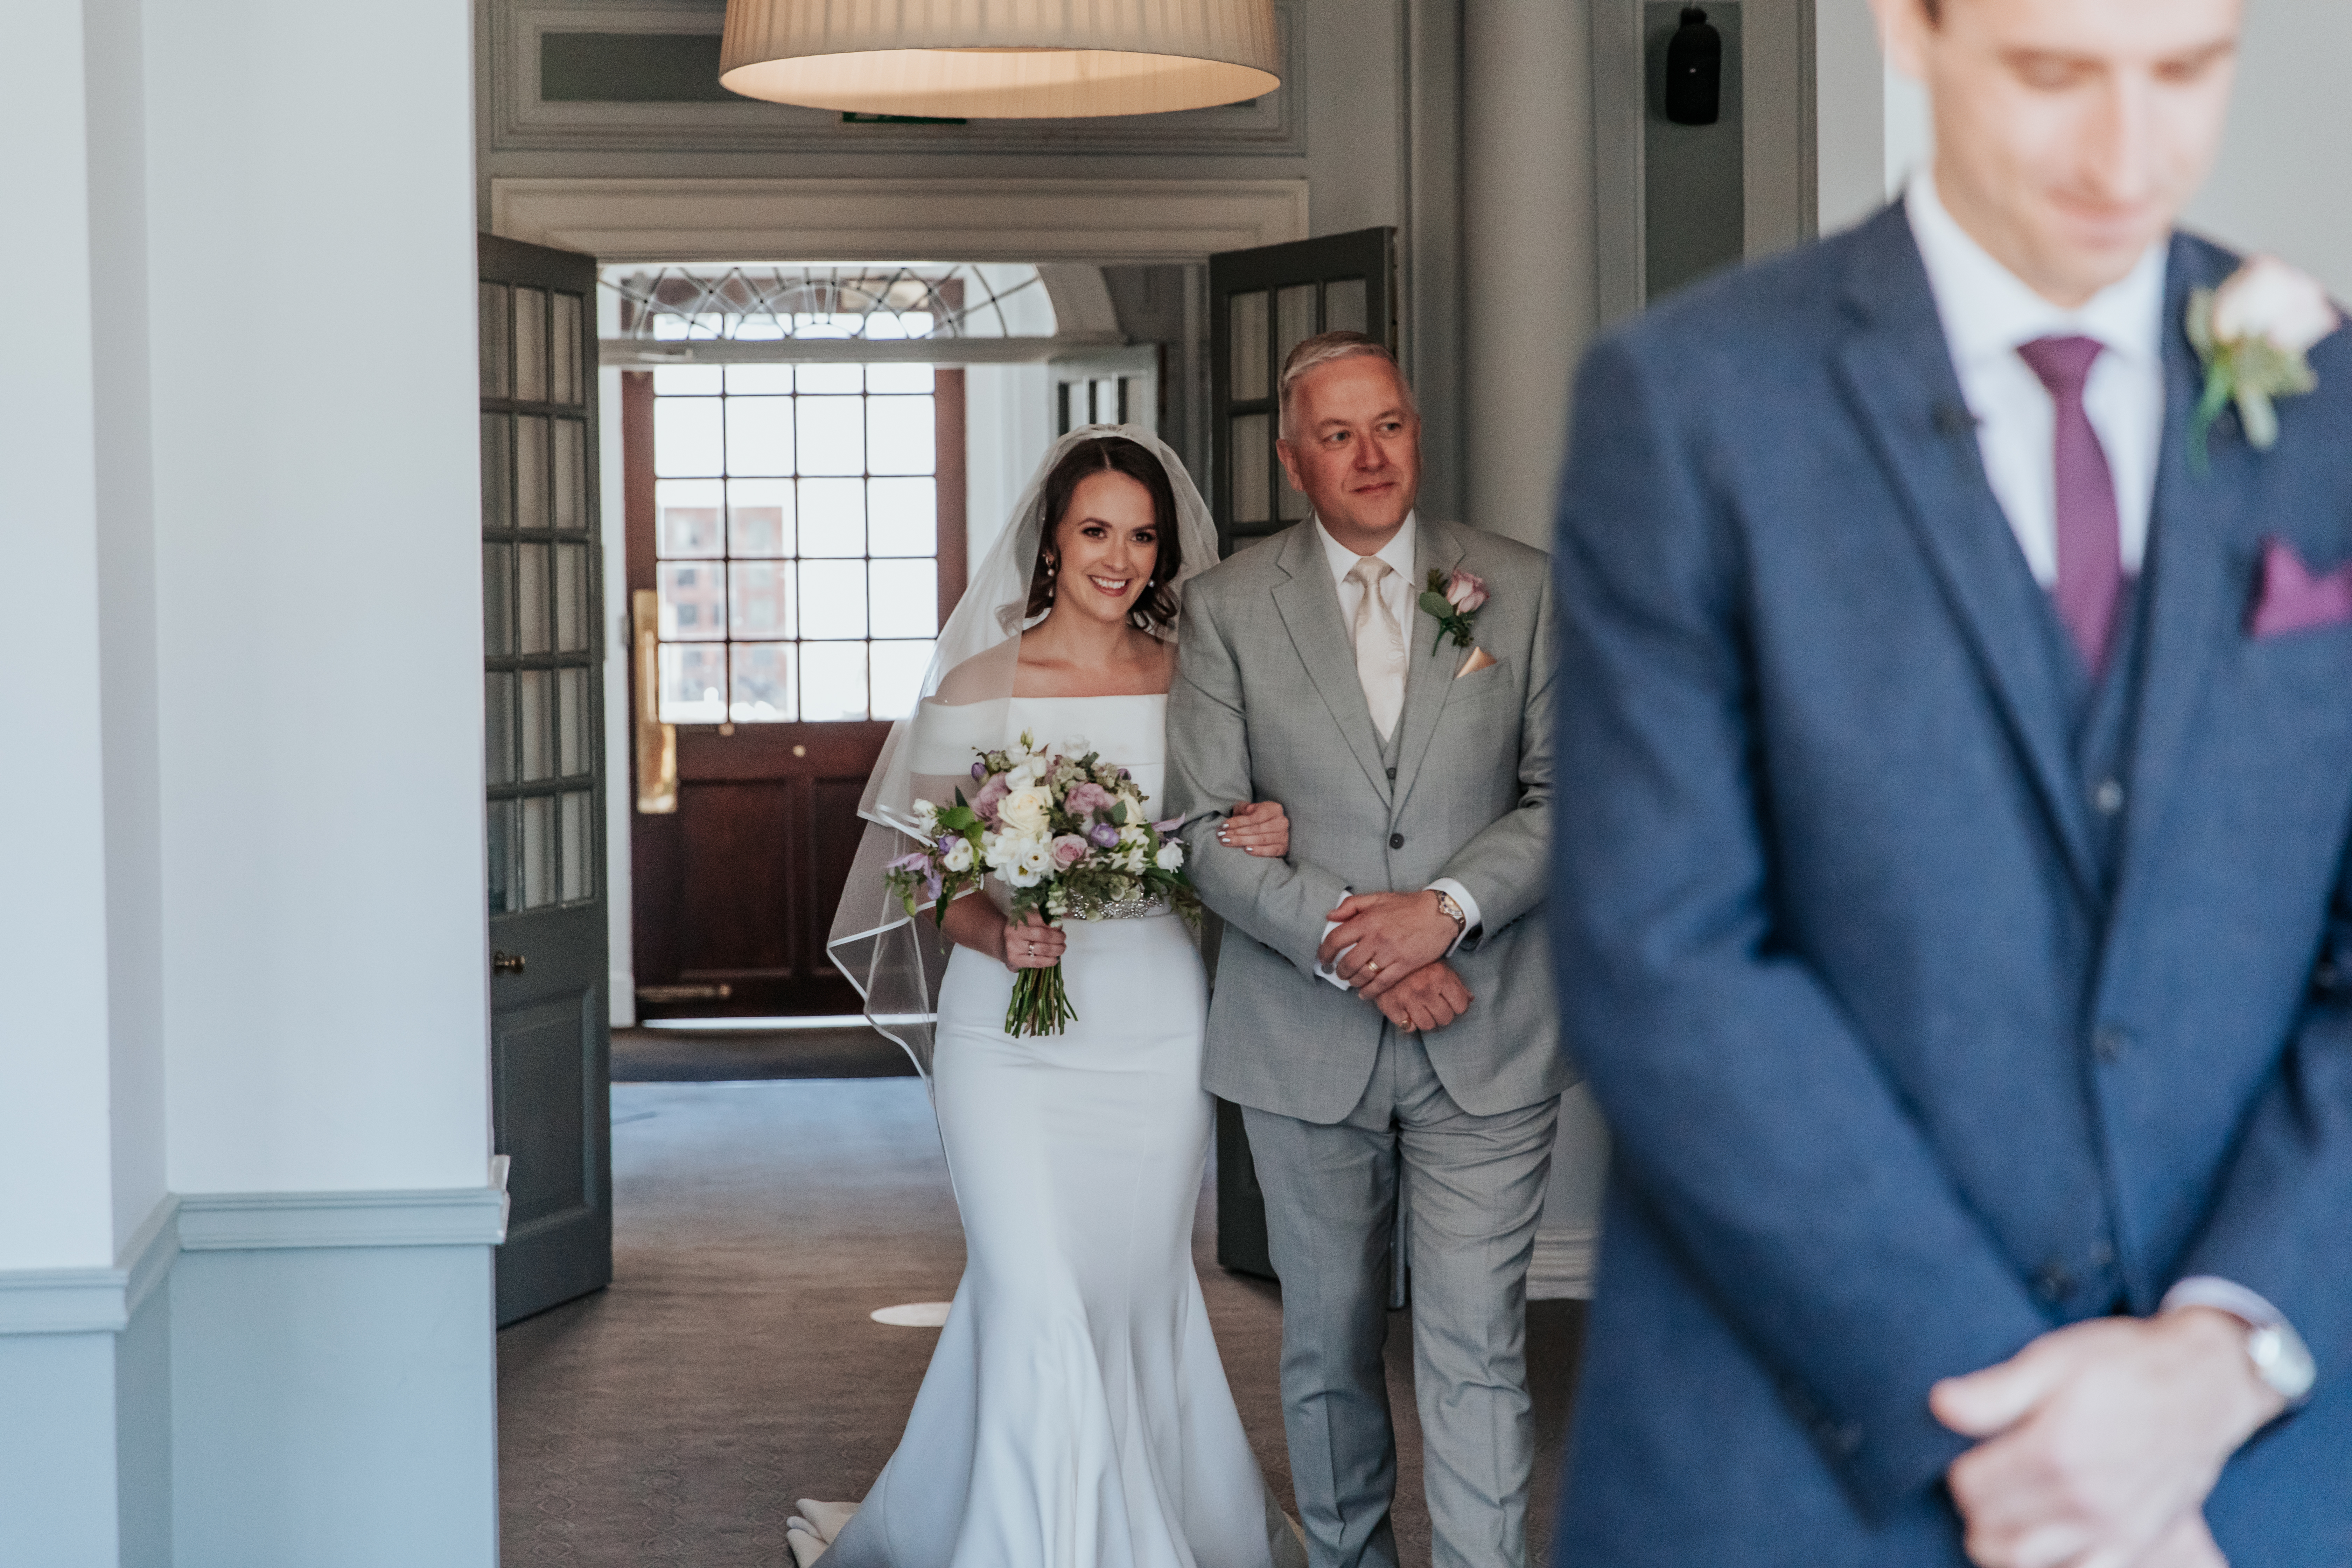 Laura's dad walks her down the aisle during their microwedding ceremony